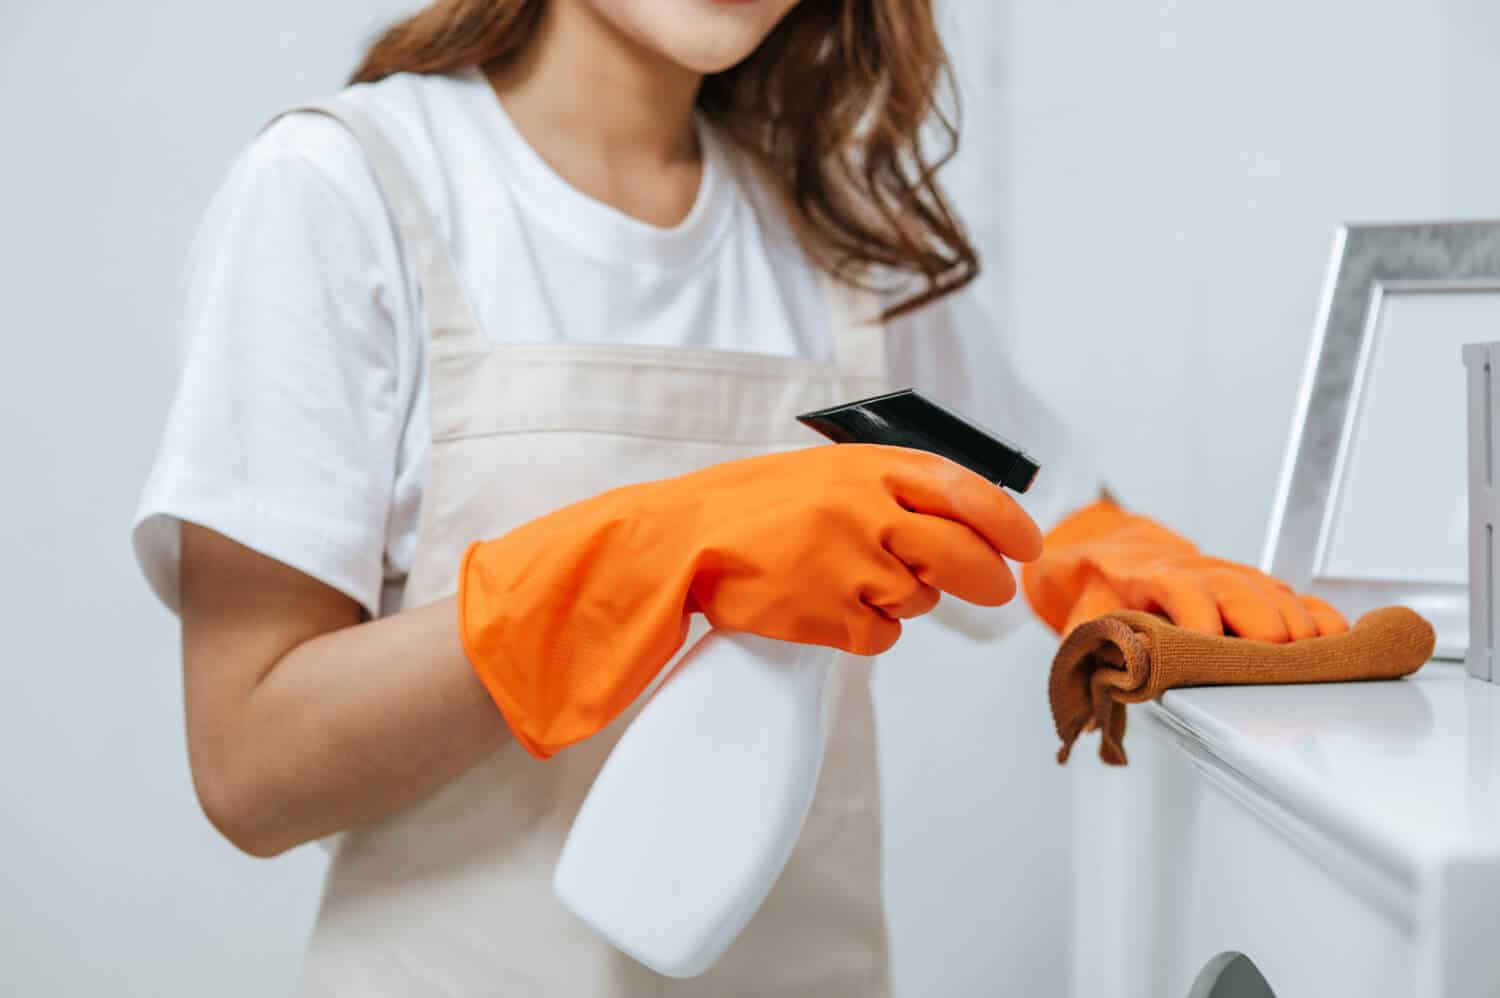 How to Deep-Clean your Entire Home in 2 weeks!